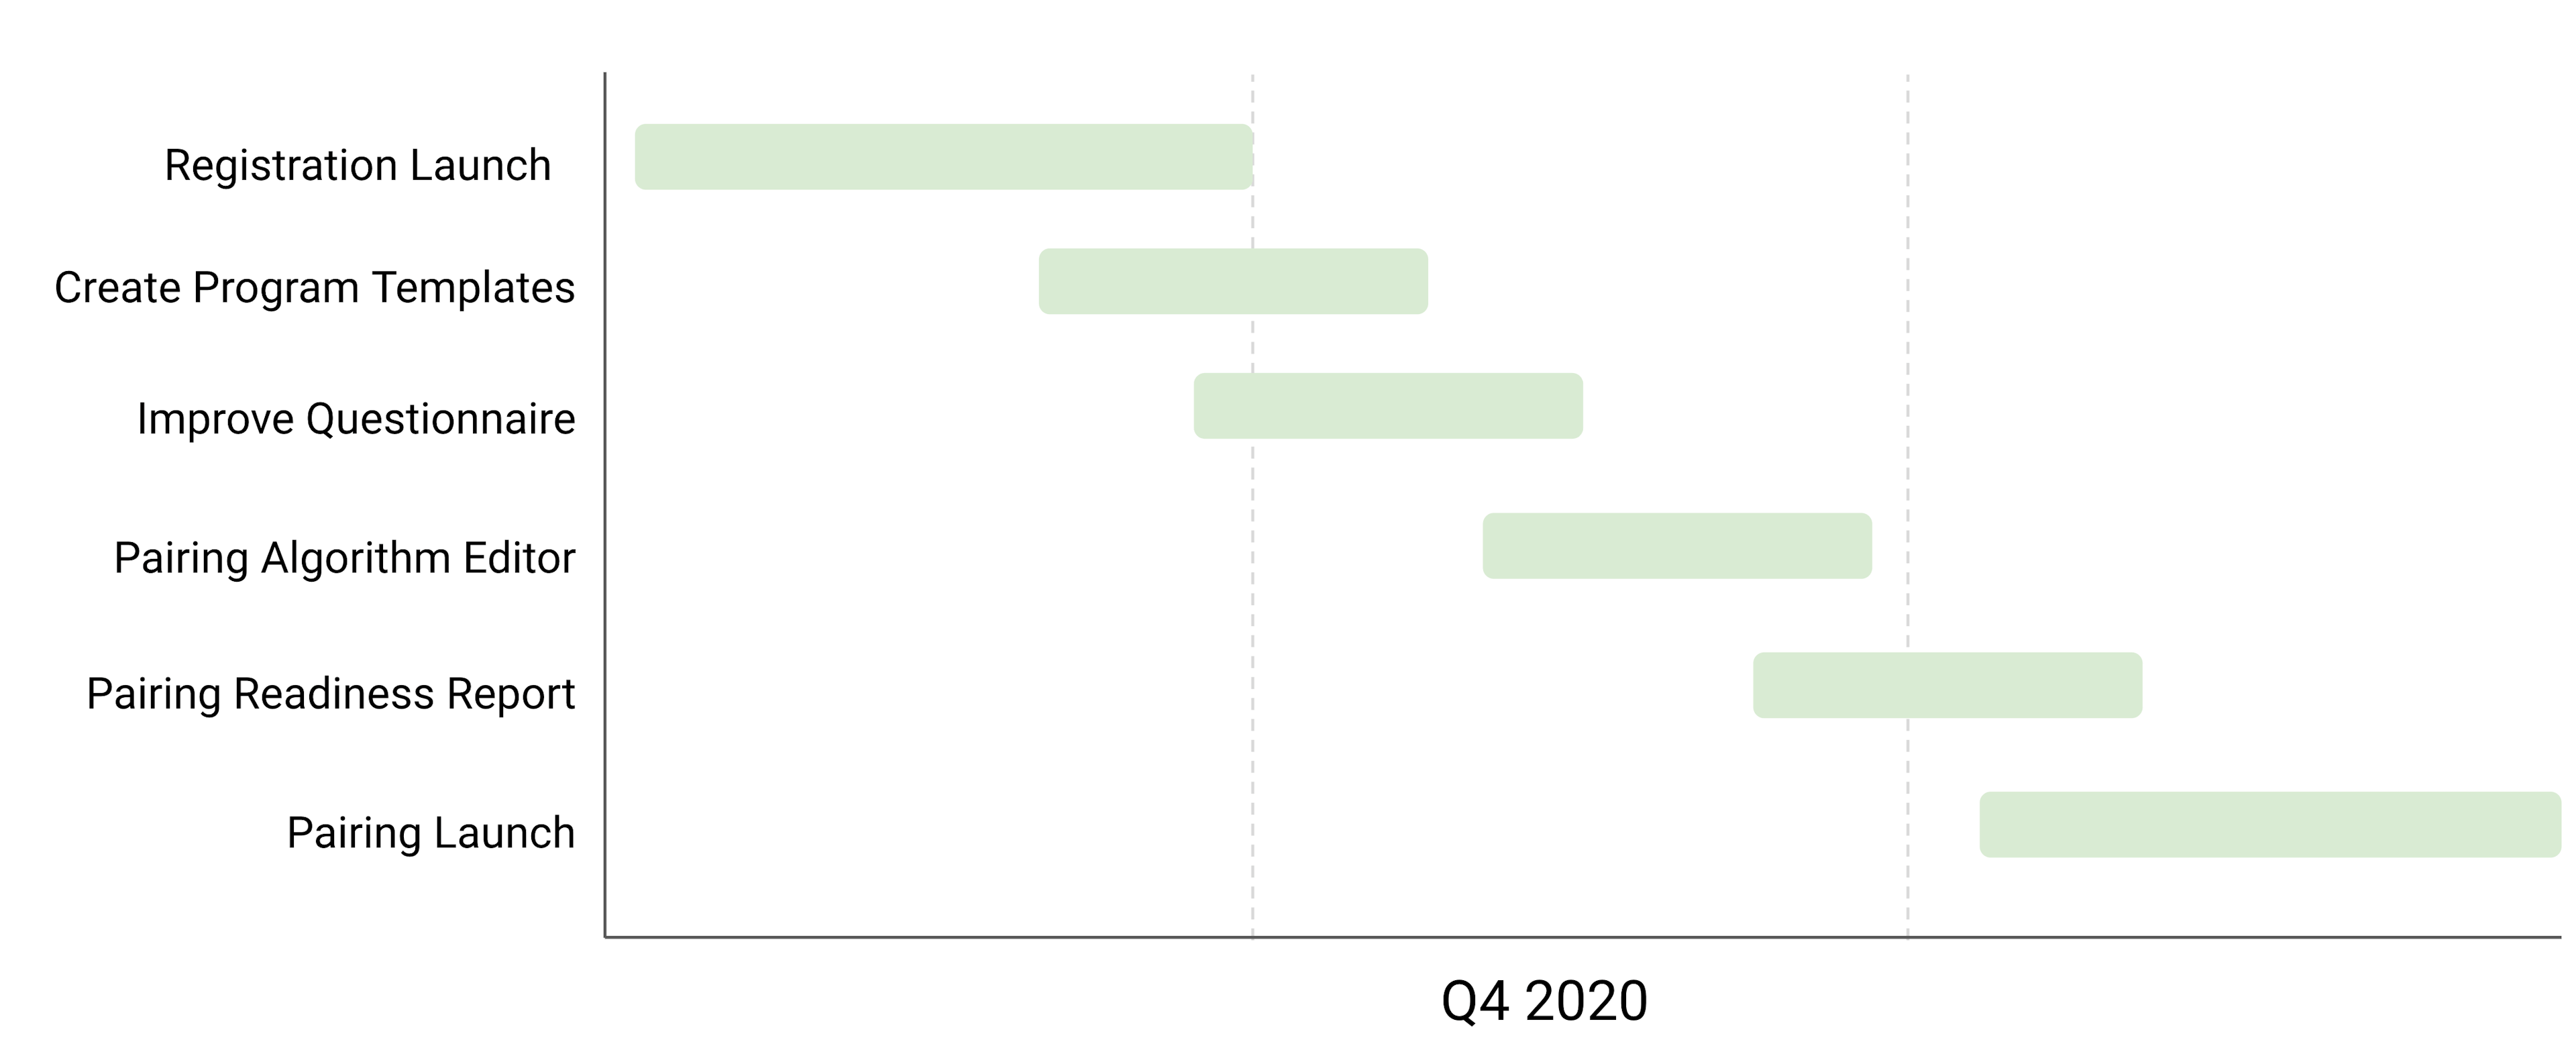 timeline of projects in a chart